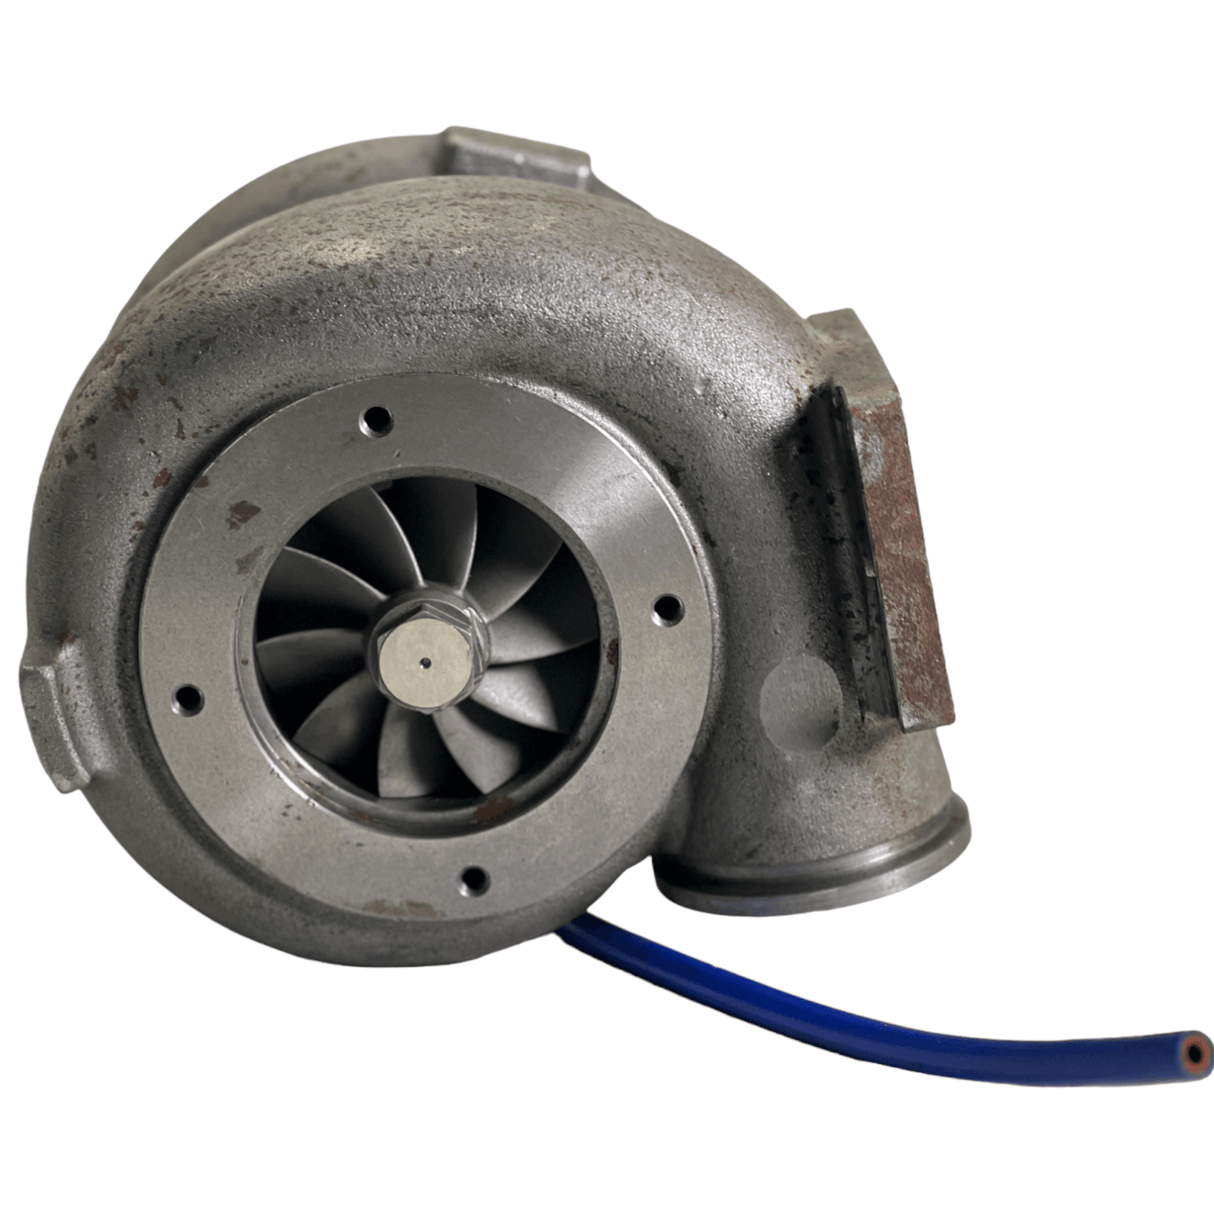 741155-0002 232-1811 Aftermarket Turbocharger Gta5518B For Cat C15 - Truck To Trailer